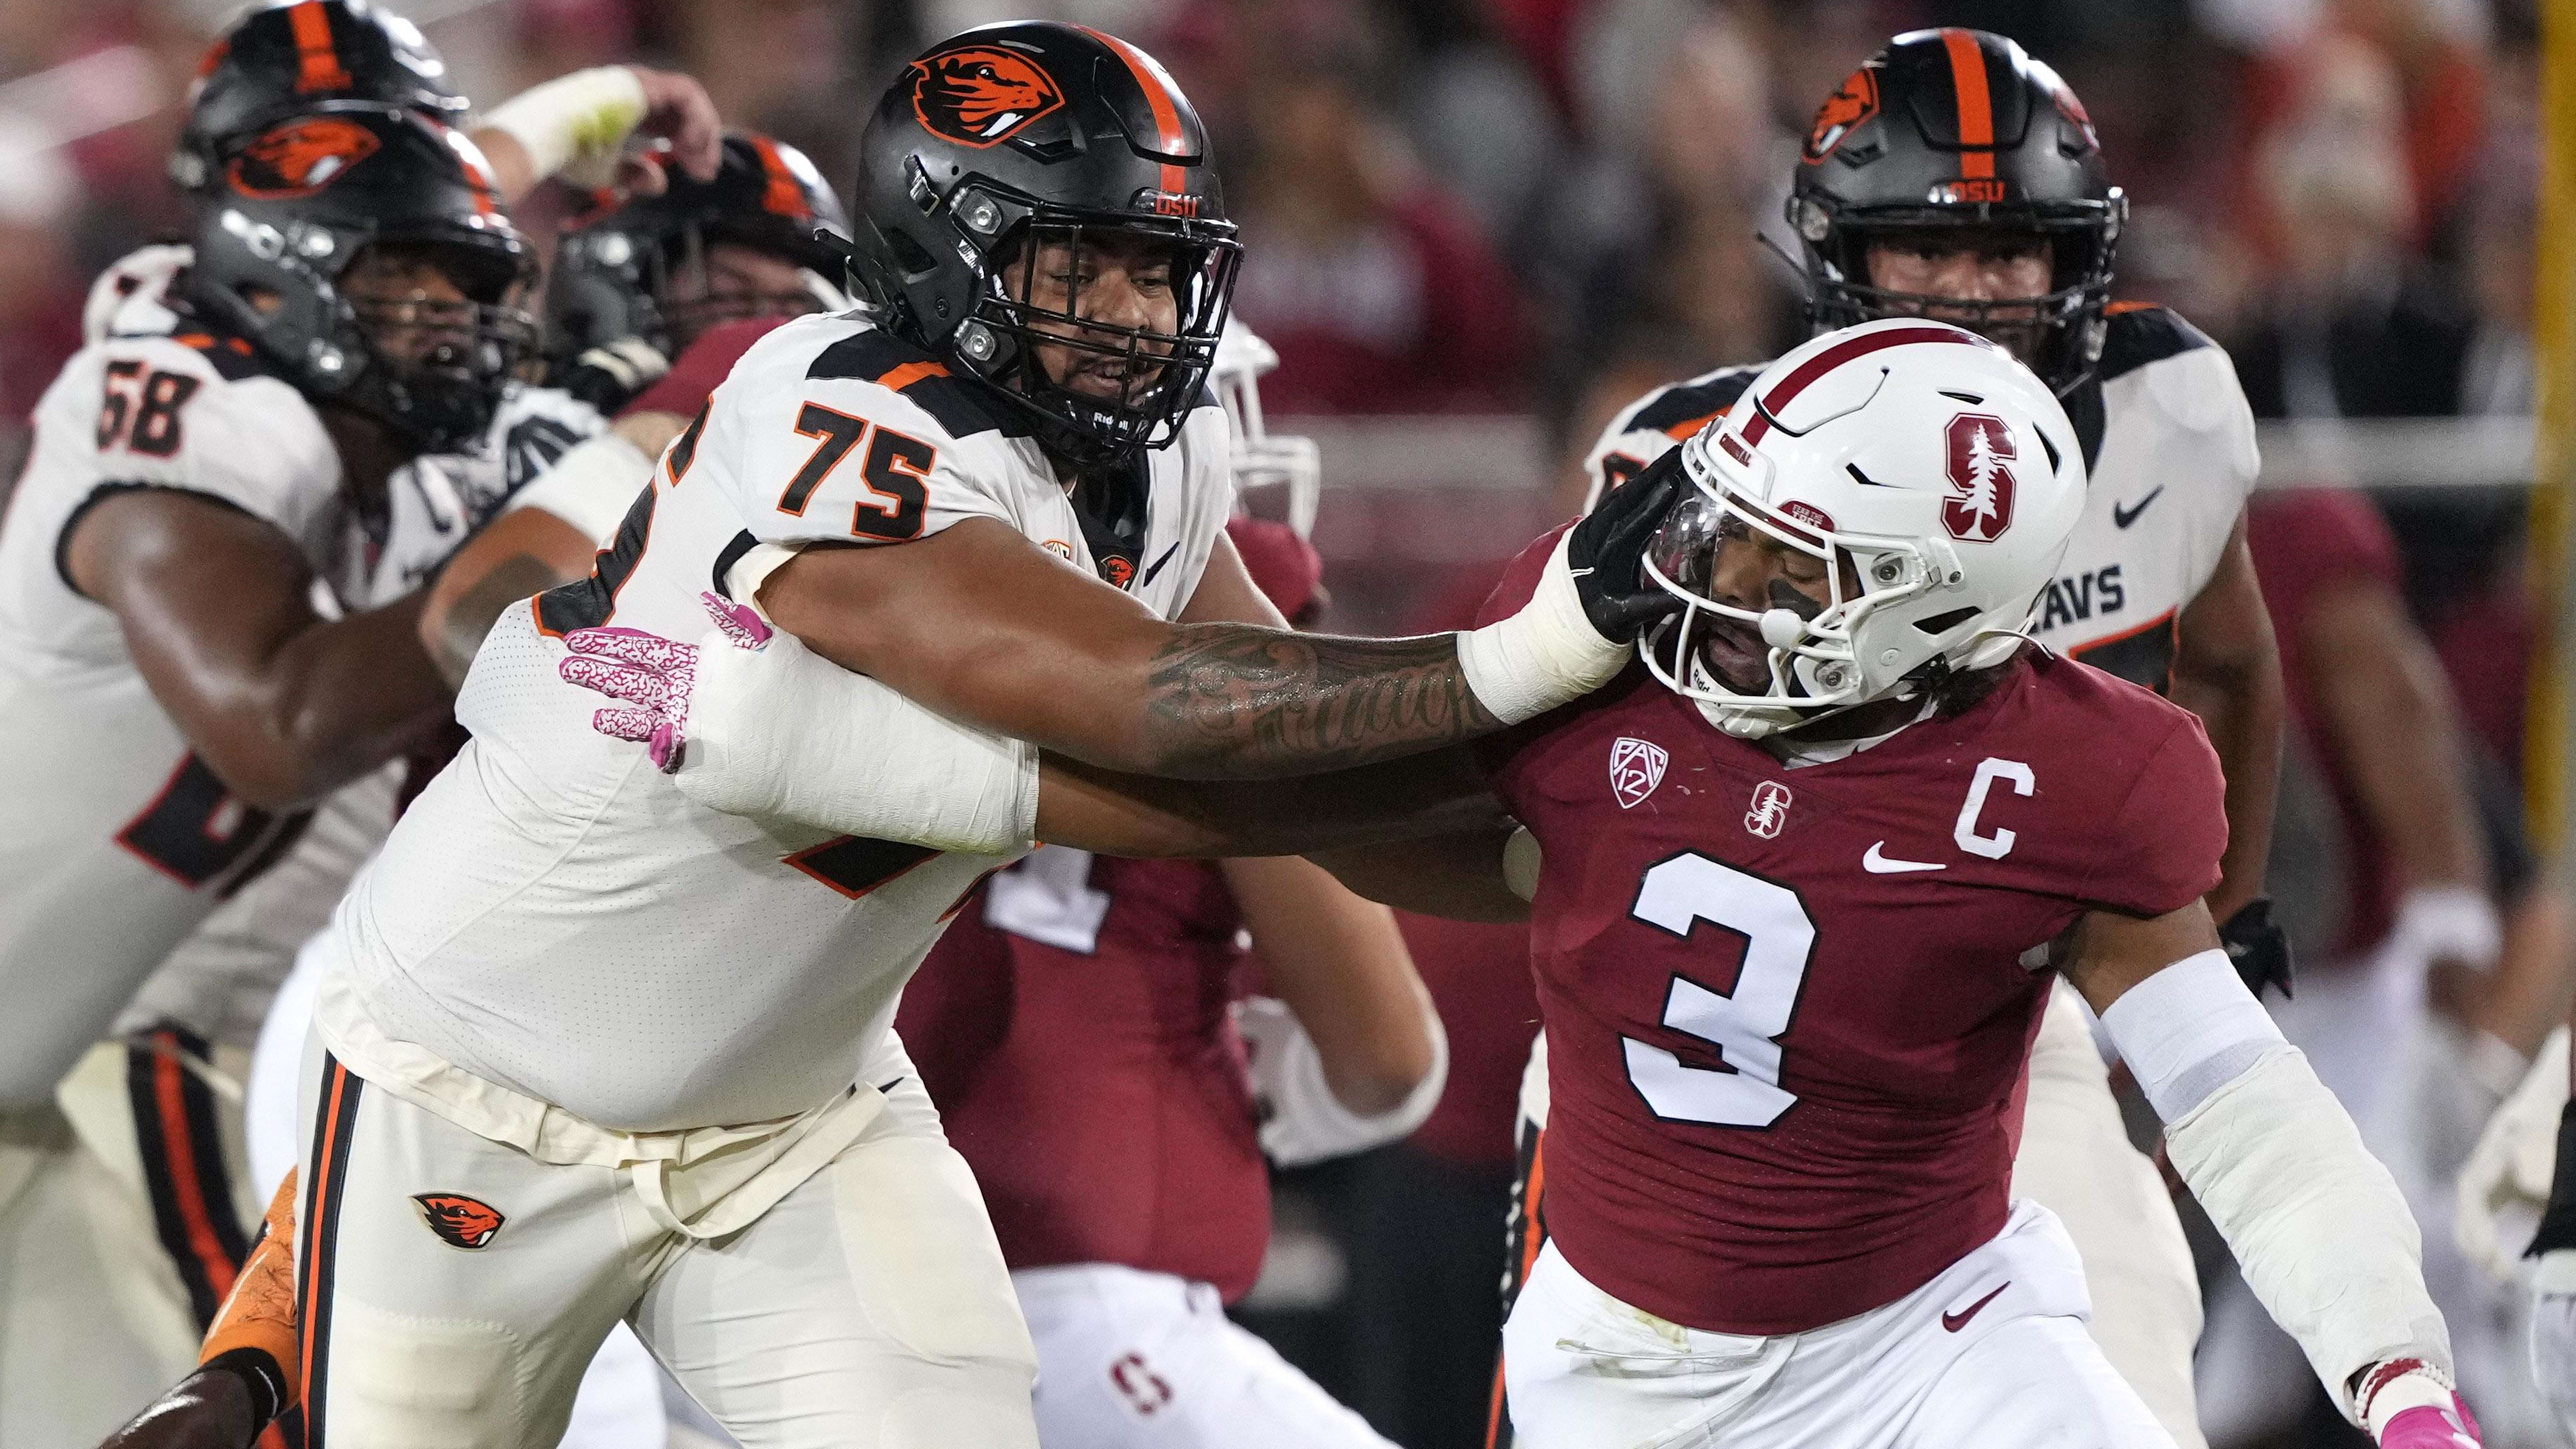 Oregon State Beavers offensive lineman Taliese Fuaga (75) blocks against the Stanford Cardinals.